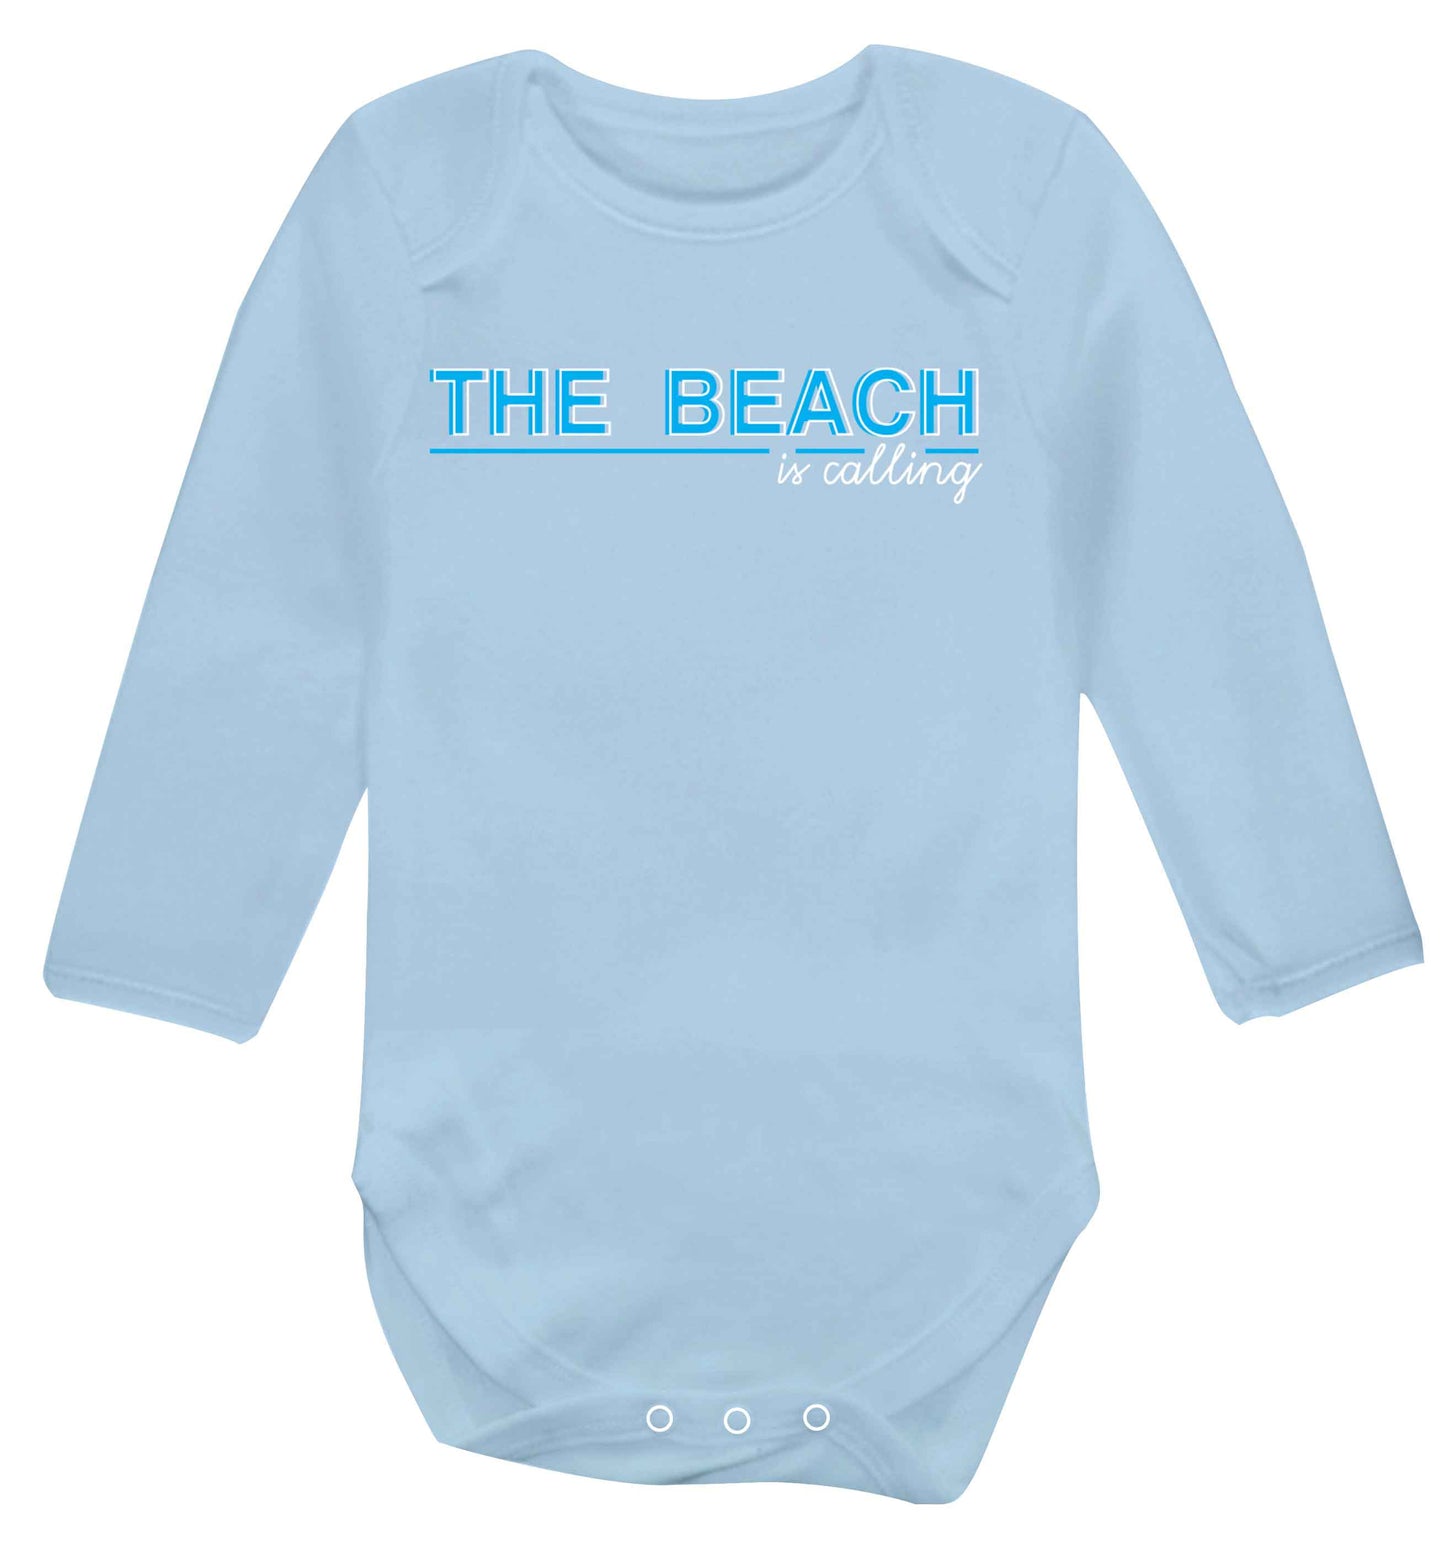 The beach is calling Baby Vest long sleeved pale blue 6-12 months